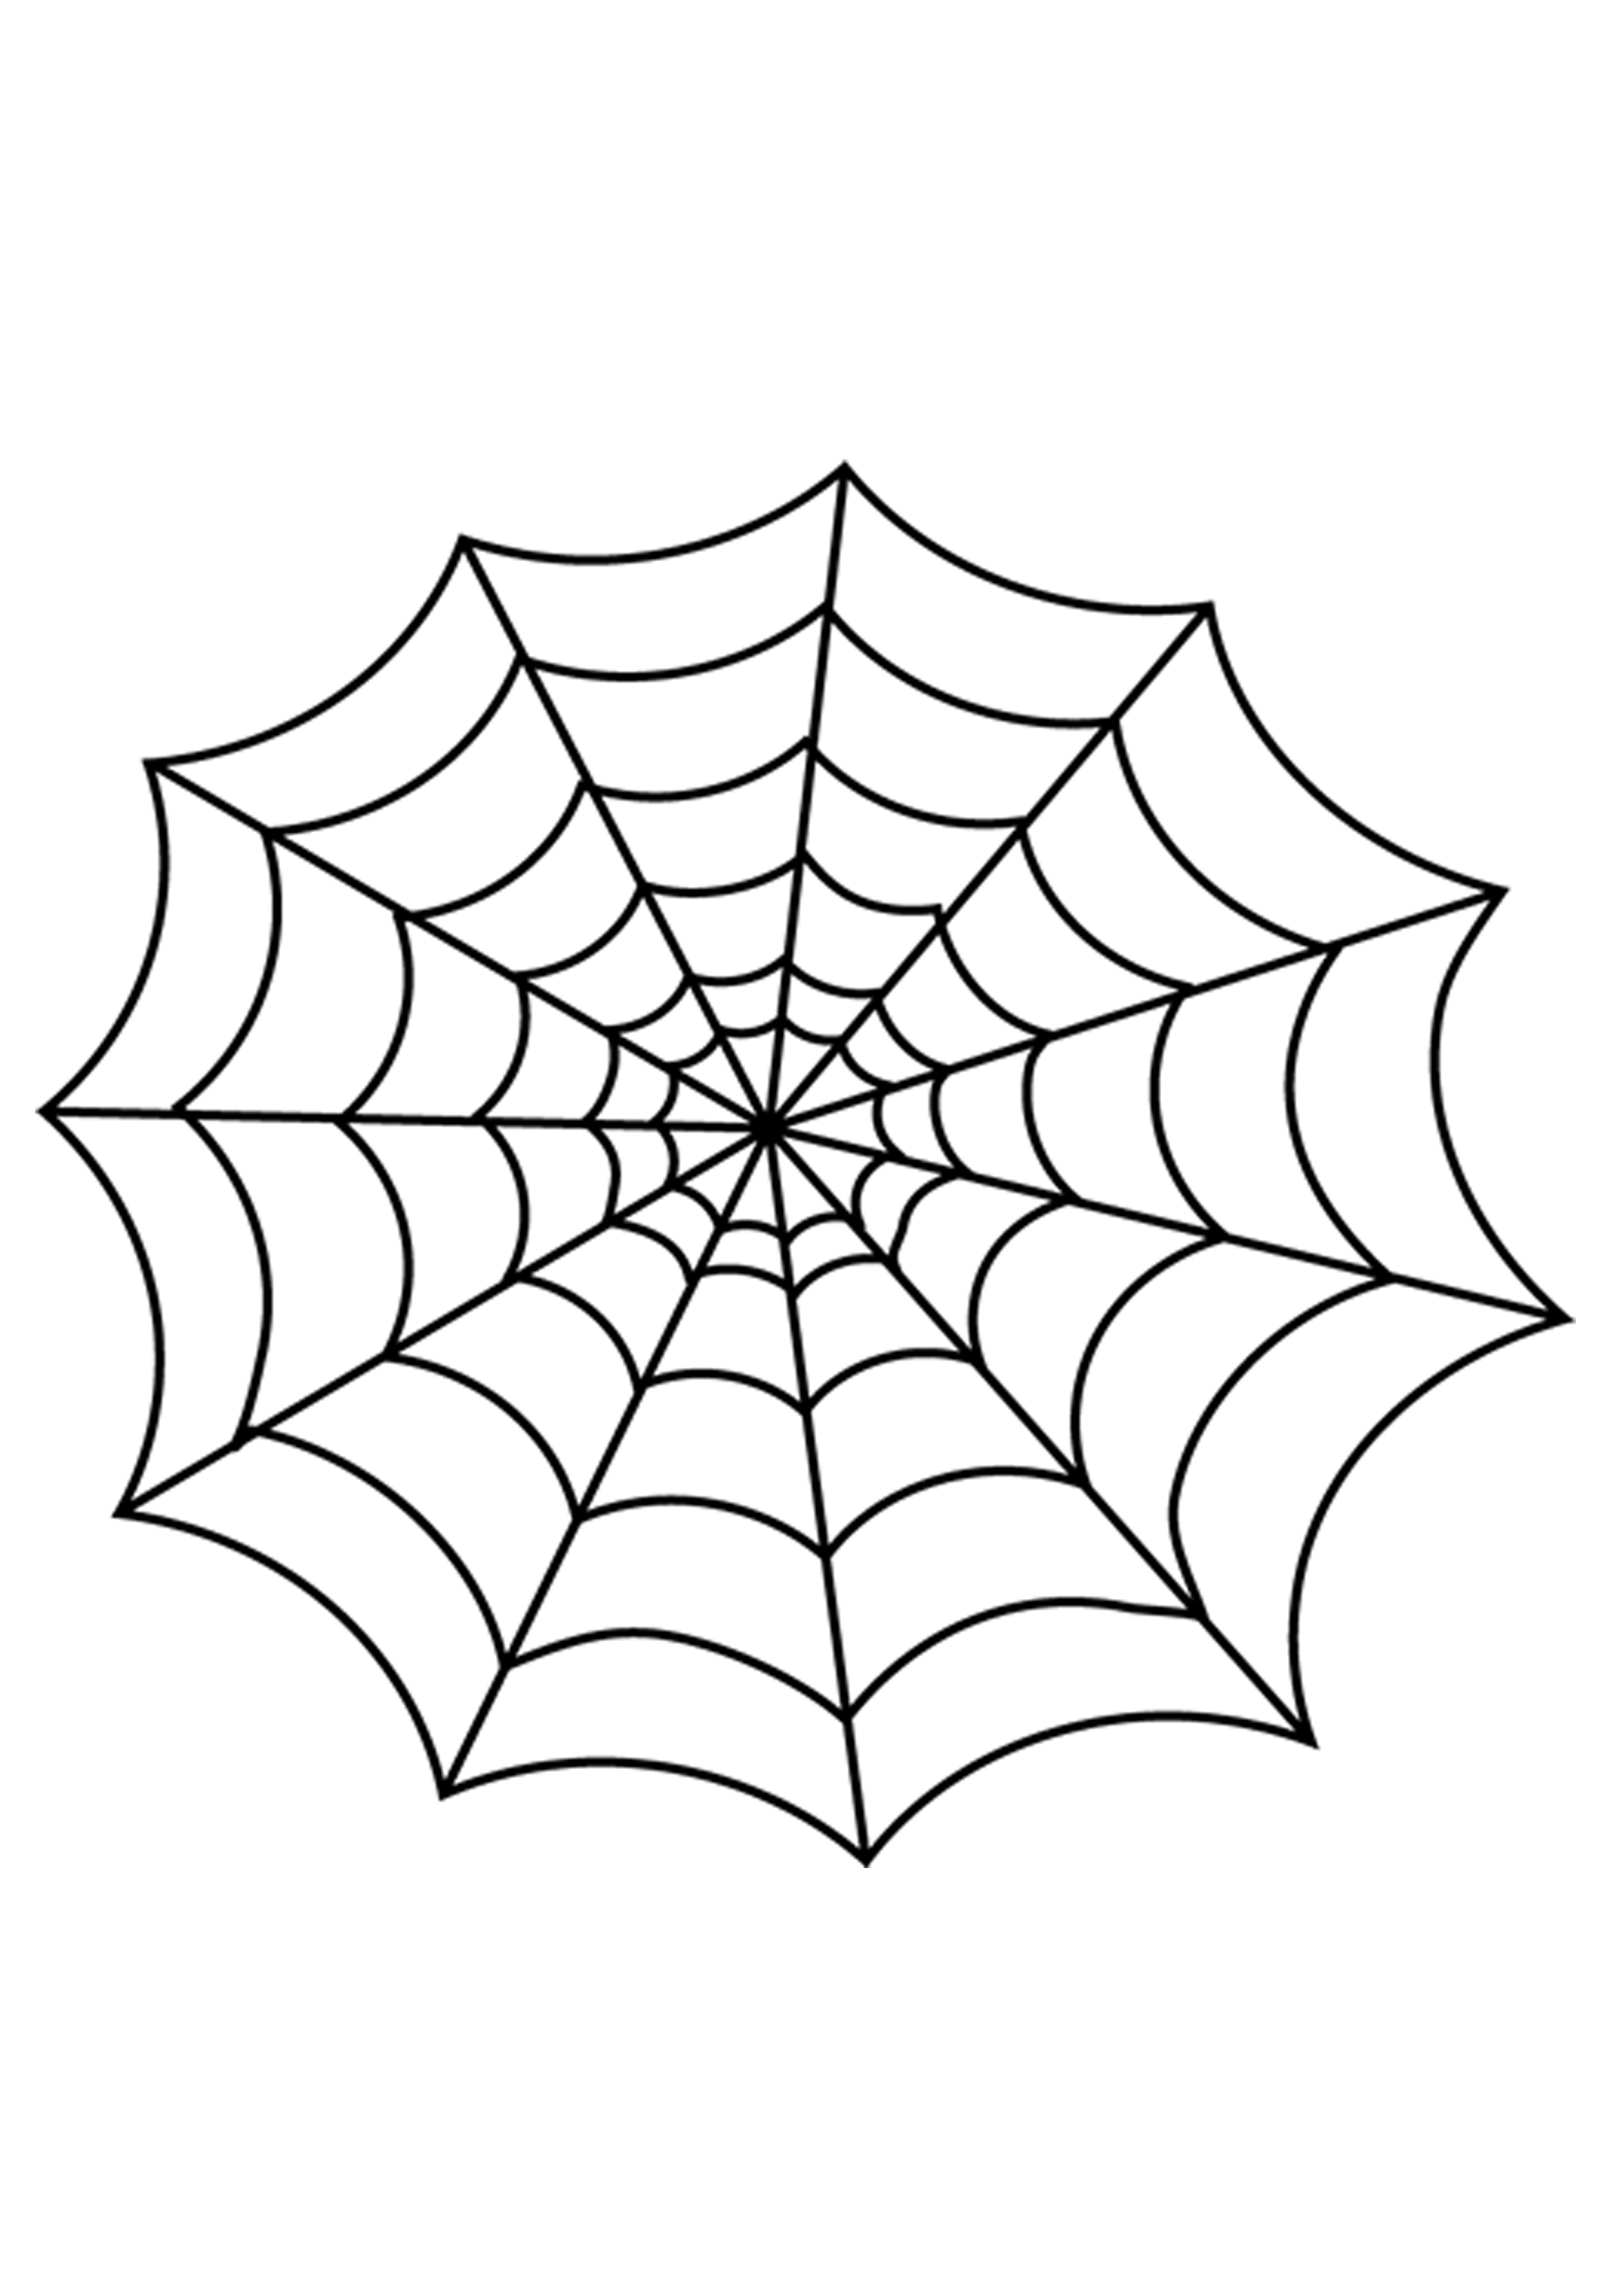 Halloween Spider Webs To Printable To | Clipart Crossword - Free Printable Spider Web